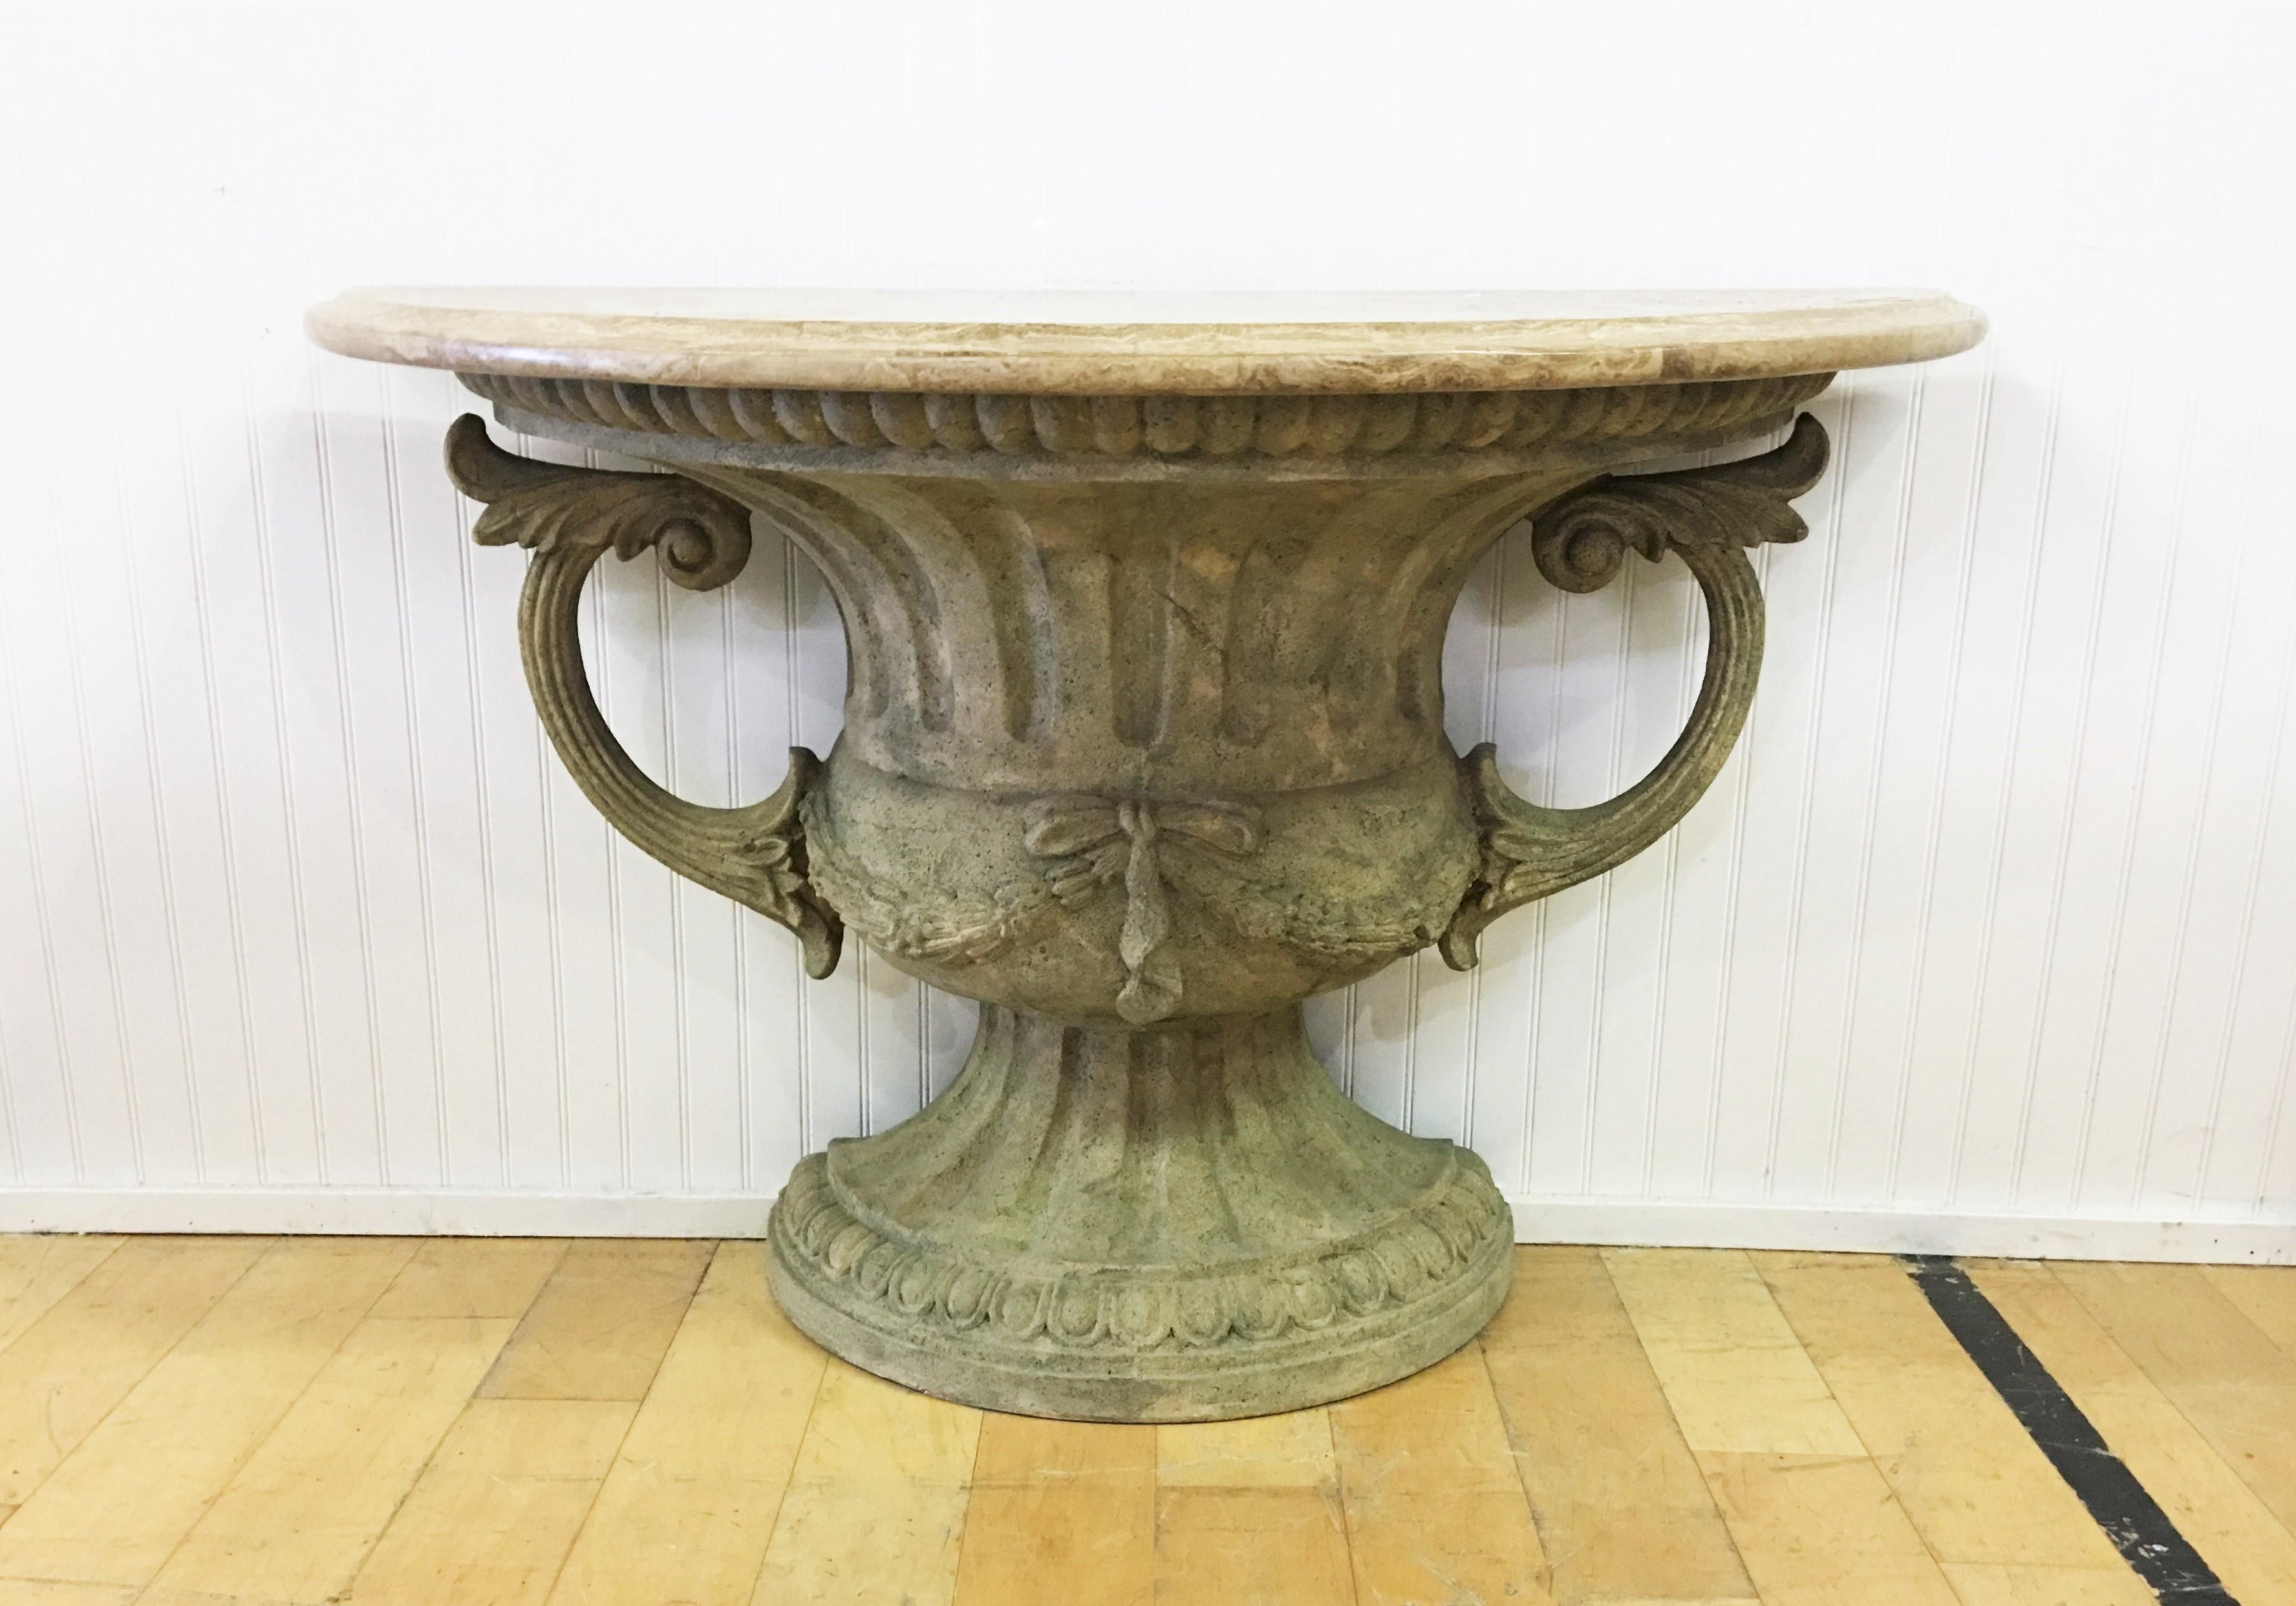 Made in the neoclassical taste! These console tables with intricately carved urn form pedestal bases, detailed carvings with demi-lune travertine marble-tops. The entire piece has a distressed painted finish with beautiful patina with age and use.